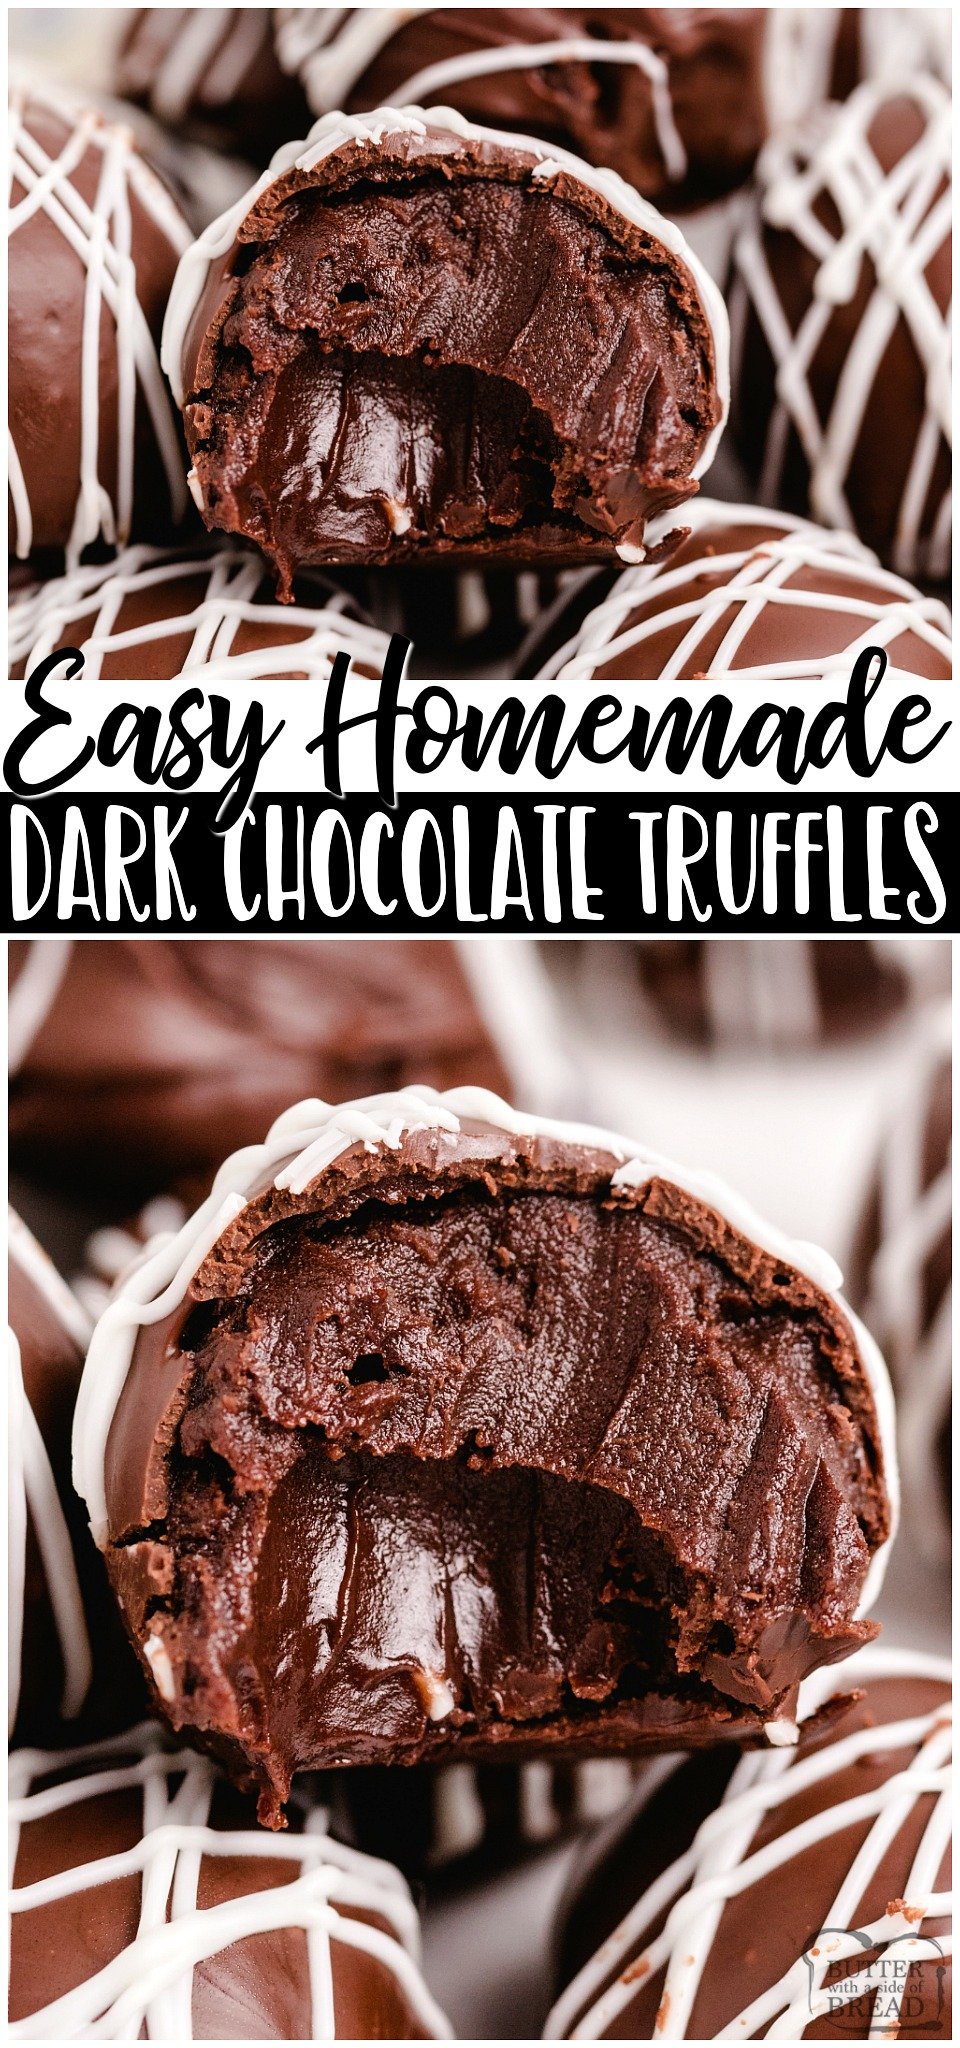 Homemade Dark chocolate Truffles made with just 5 ingredients and SO amazing! Chocolate chips, heavy cream and butter combine for a rich & smooth luscious chocolate truffle filling you make easily at home! #chocolate #truffles #homemade #candy #dessert #easyrecipe from BUTTER WITH A SIDE OF BREAD